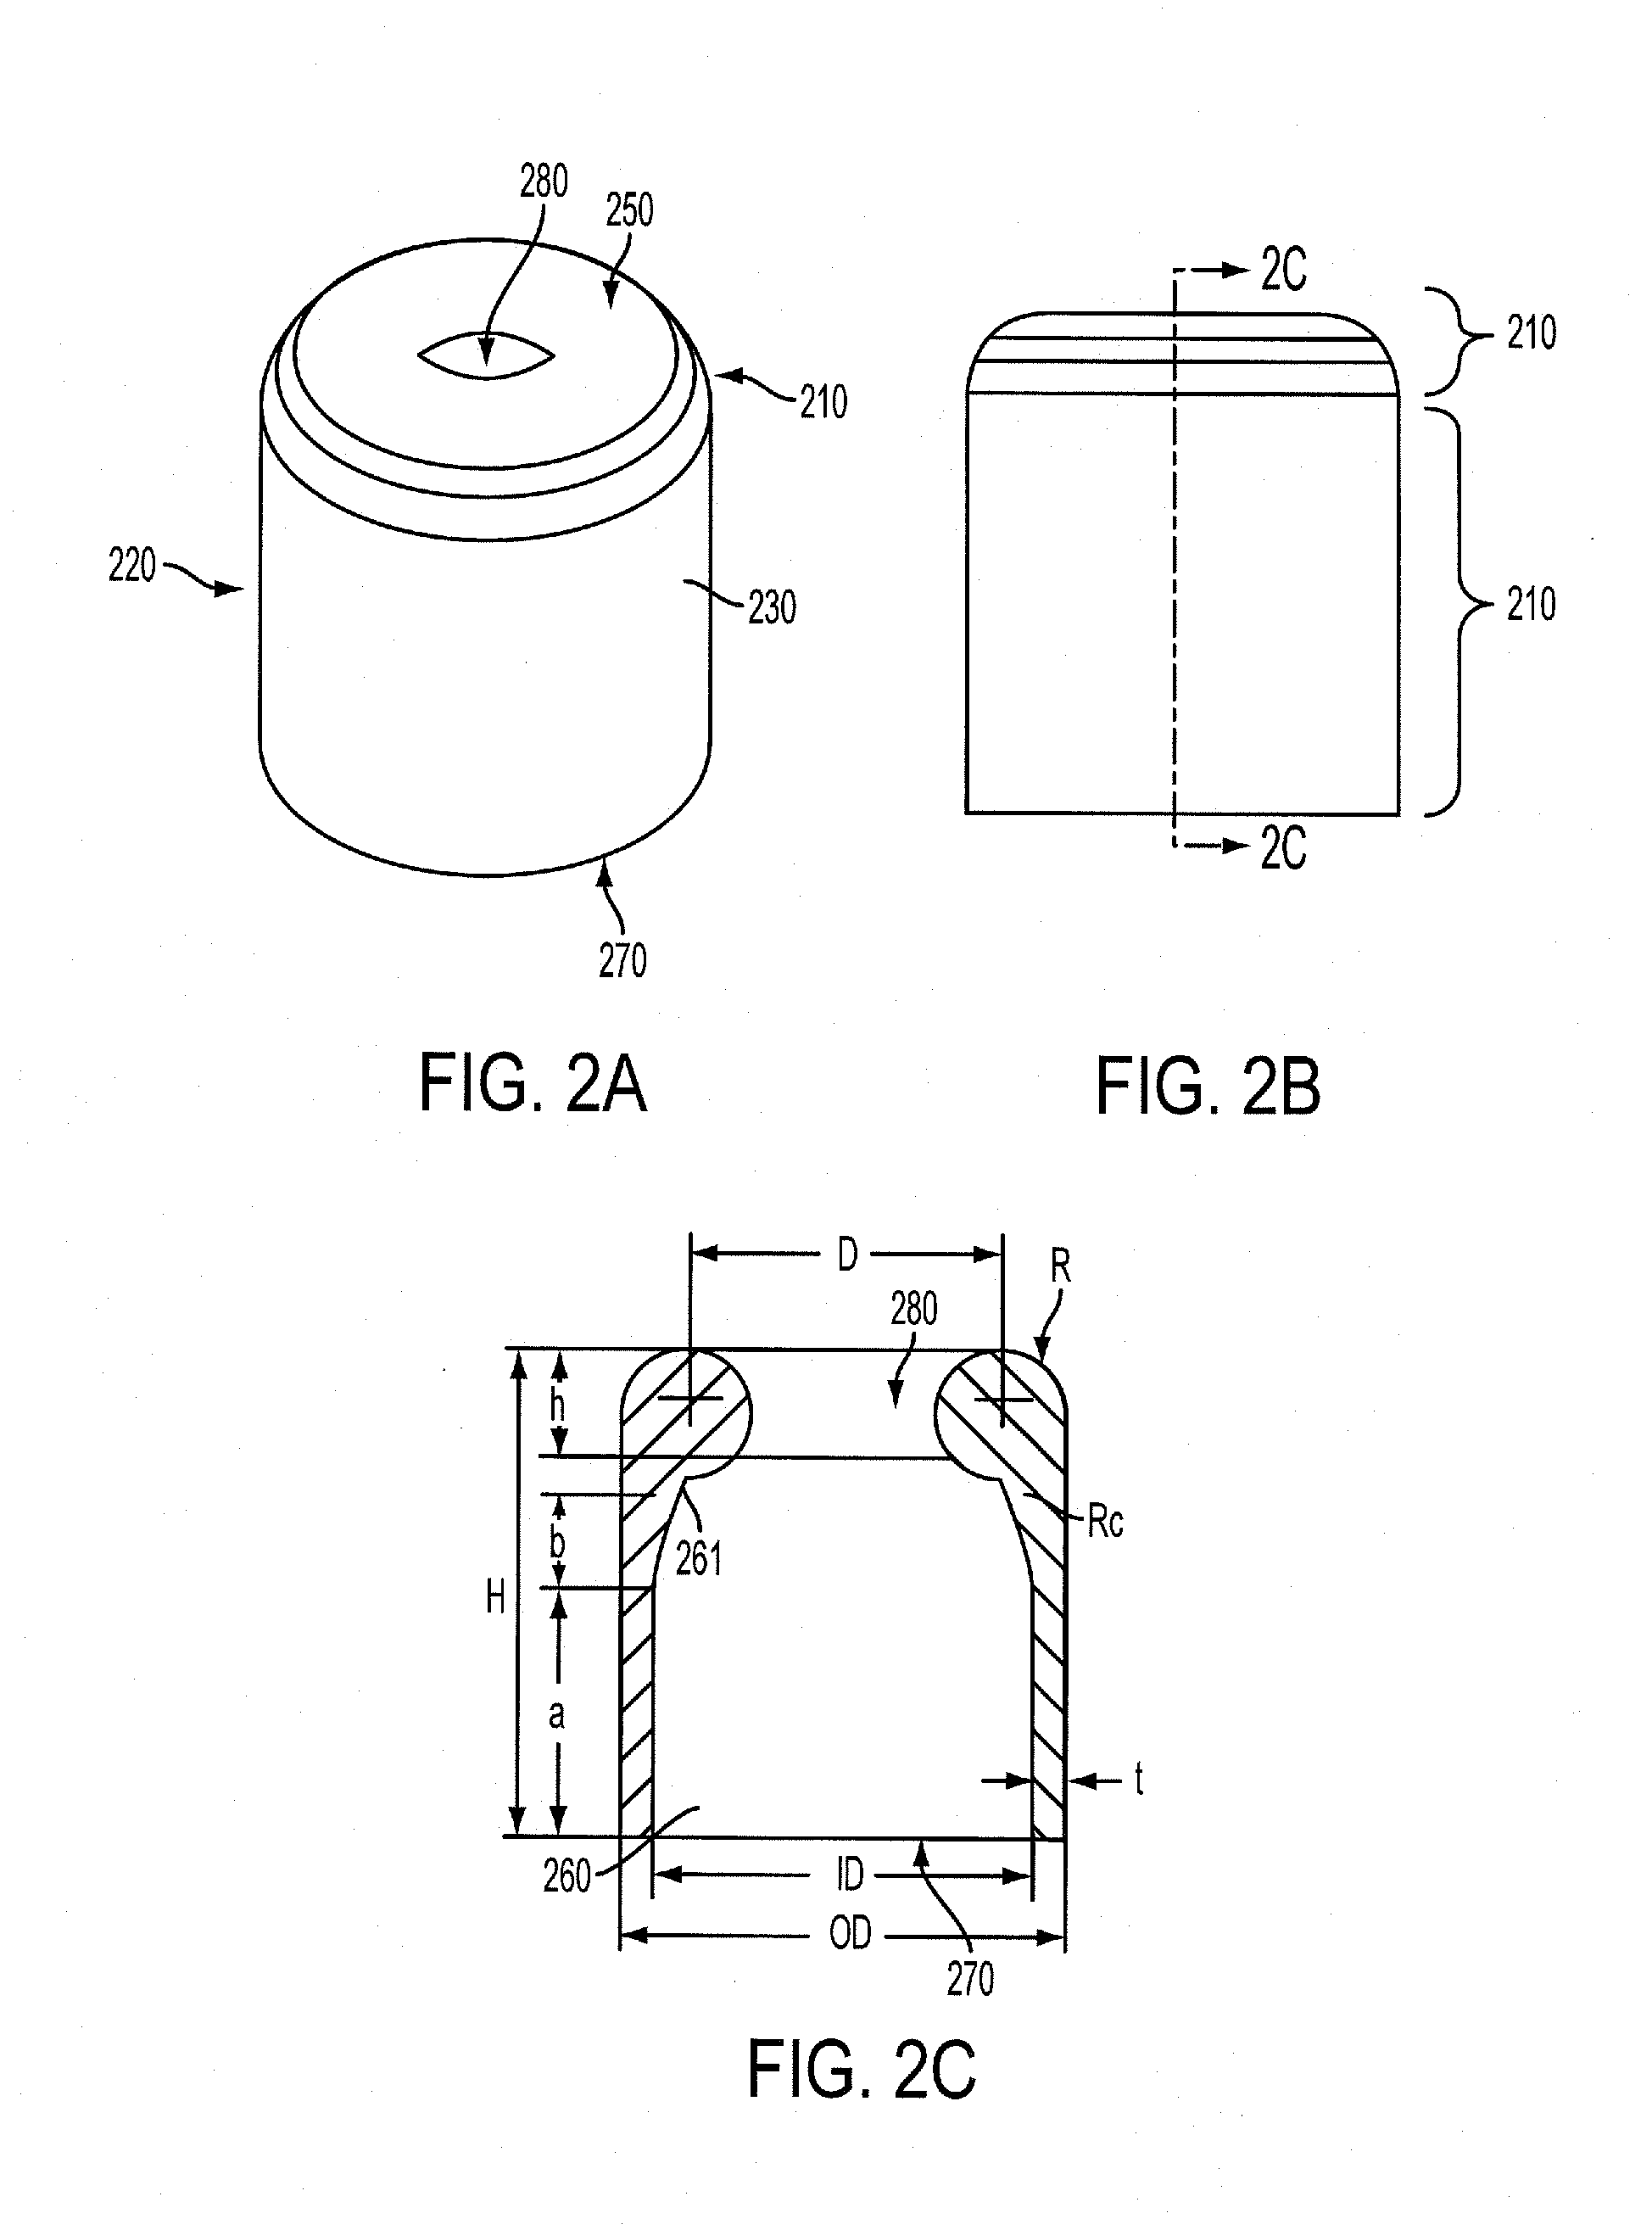 Method and apparatus for gas cylinder sealing